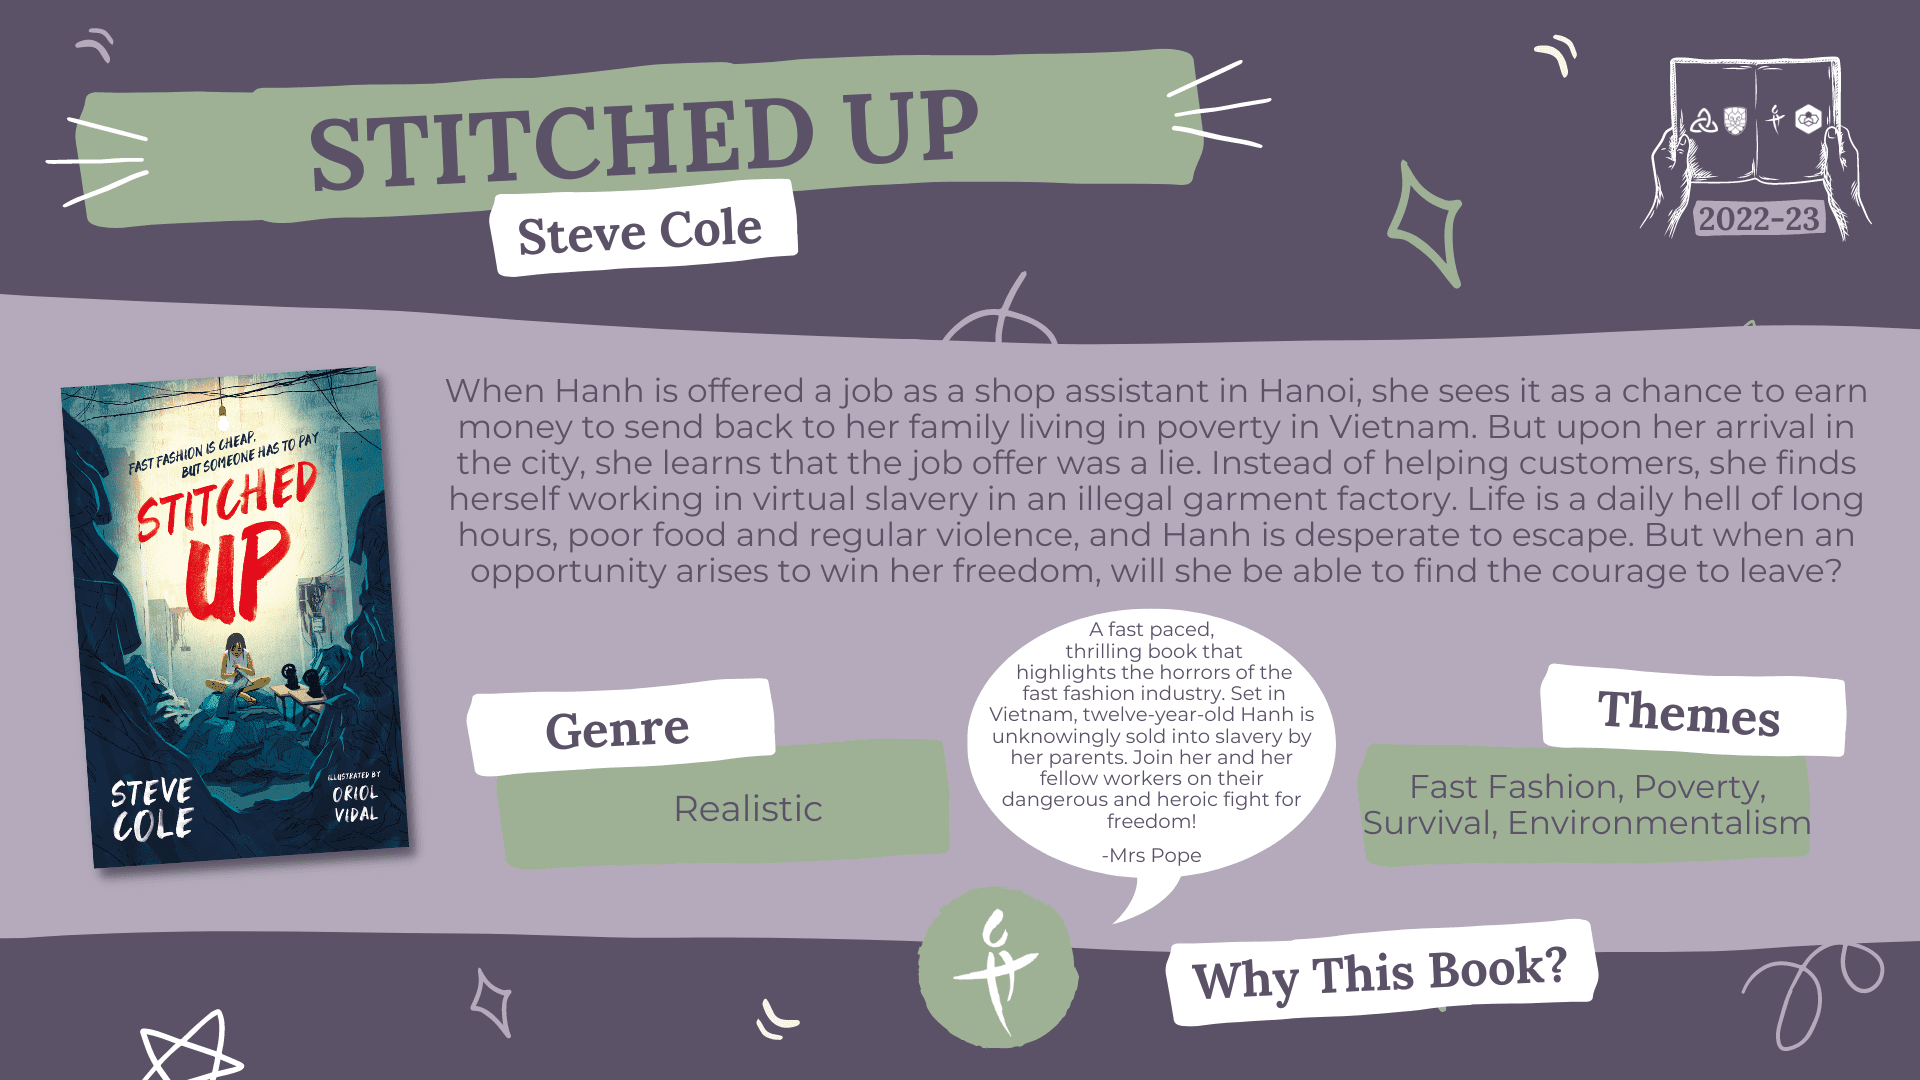 Stitched Up by Steve Cole Genre: Realistic Themes: Fast Fashion, Poverty, Survival, Environmentalism Why this book?: A fast paced, thrilling book that highlights the horrors of the fast fashion industry. Set in Vietnam, twelve-year-old Hanh is unknowingly sold into slavery by her parents. Join her and her fellow workers on their dangerous and heroic fight for freedom! -Mrs Pope